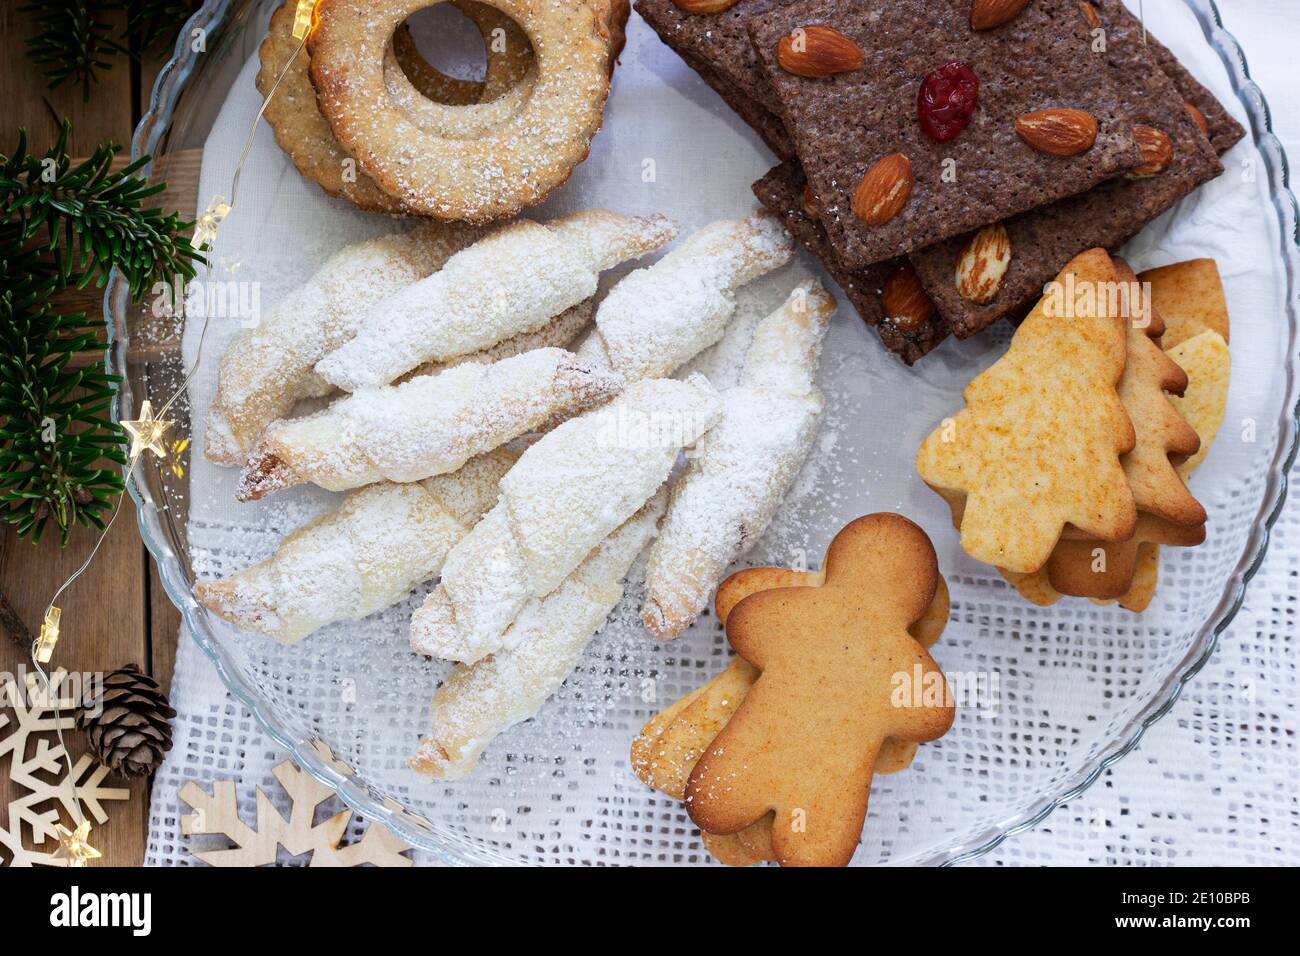 Assorted cookies, fir branches and a garland on a light background. Stock Photo